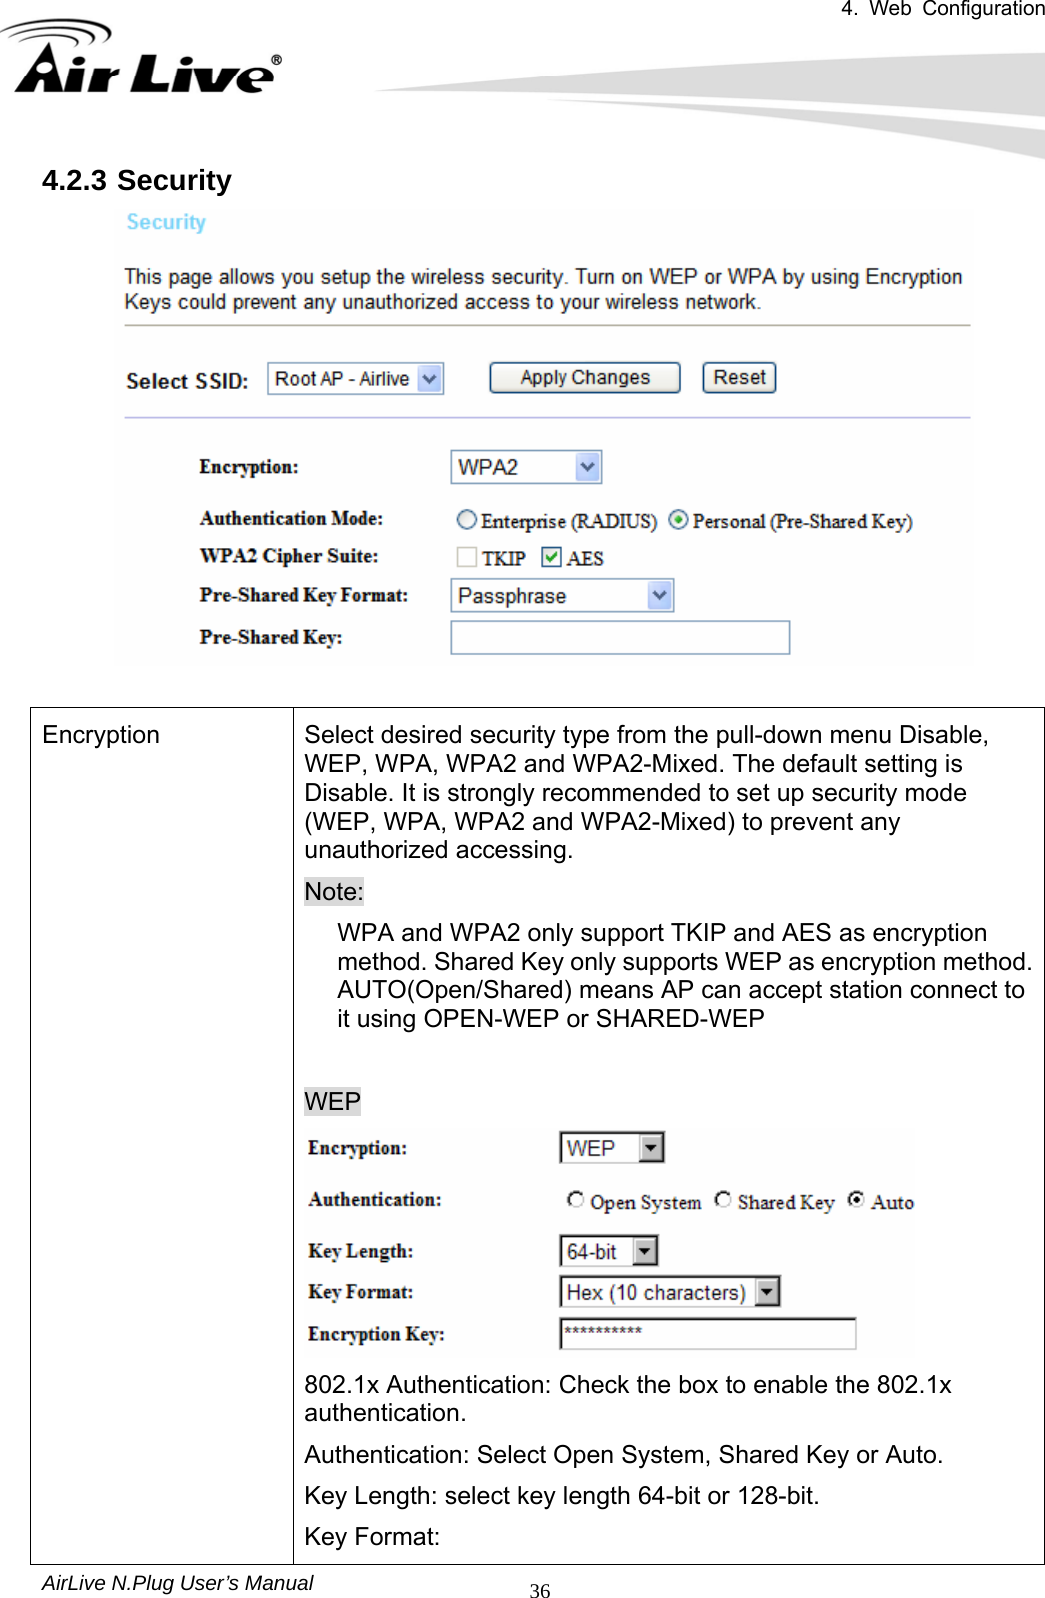 4. Web Configuration       AirLive N.Plug User’s Manual  364.2.3 Security   Encryption  Select desired security type from the pull-down menu Disable, WEP, WPA, WPA2 and WPA2-Mixed. The default setting is Disable. It is strongly recommended to set up security mode (WEP, WPA, WPA2 and WPA2-Mixed) to prevent any unauthorized accessing. Note: WPA and WPA2 only support TKIP and AES as encryption method. Shared Key only supports WEP as encryption method. AUTO(Open/Shared) means AP can accept station connect to it using OPEN-WEP or SHARED-WEP  WEP  802.1x Authentication: Check the box to enable the 802.1x authentication. Authentication: Select Open System, Shared Key or Auto. Key Length: select key length 64-bit or 128-bit. Key Format: 